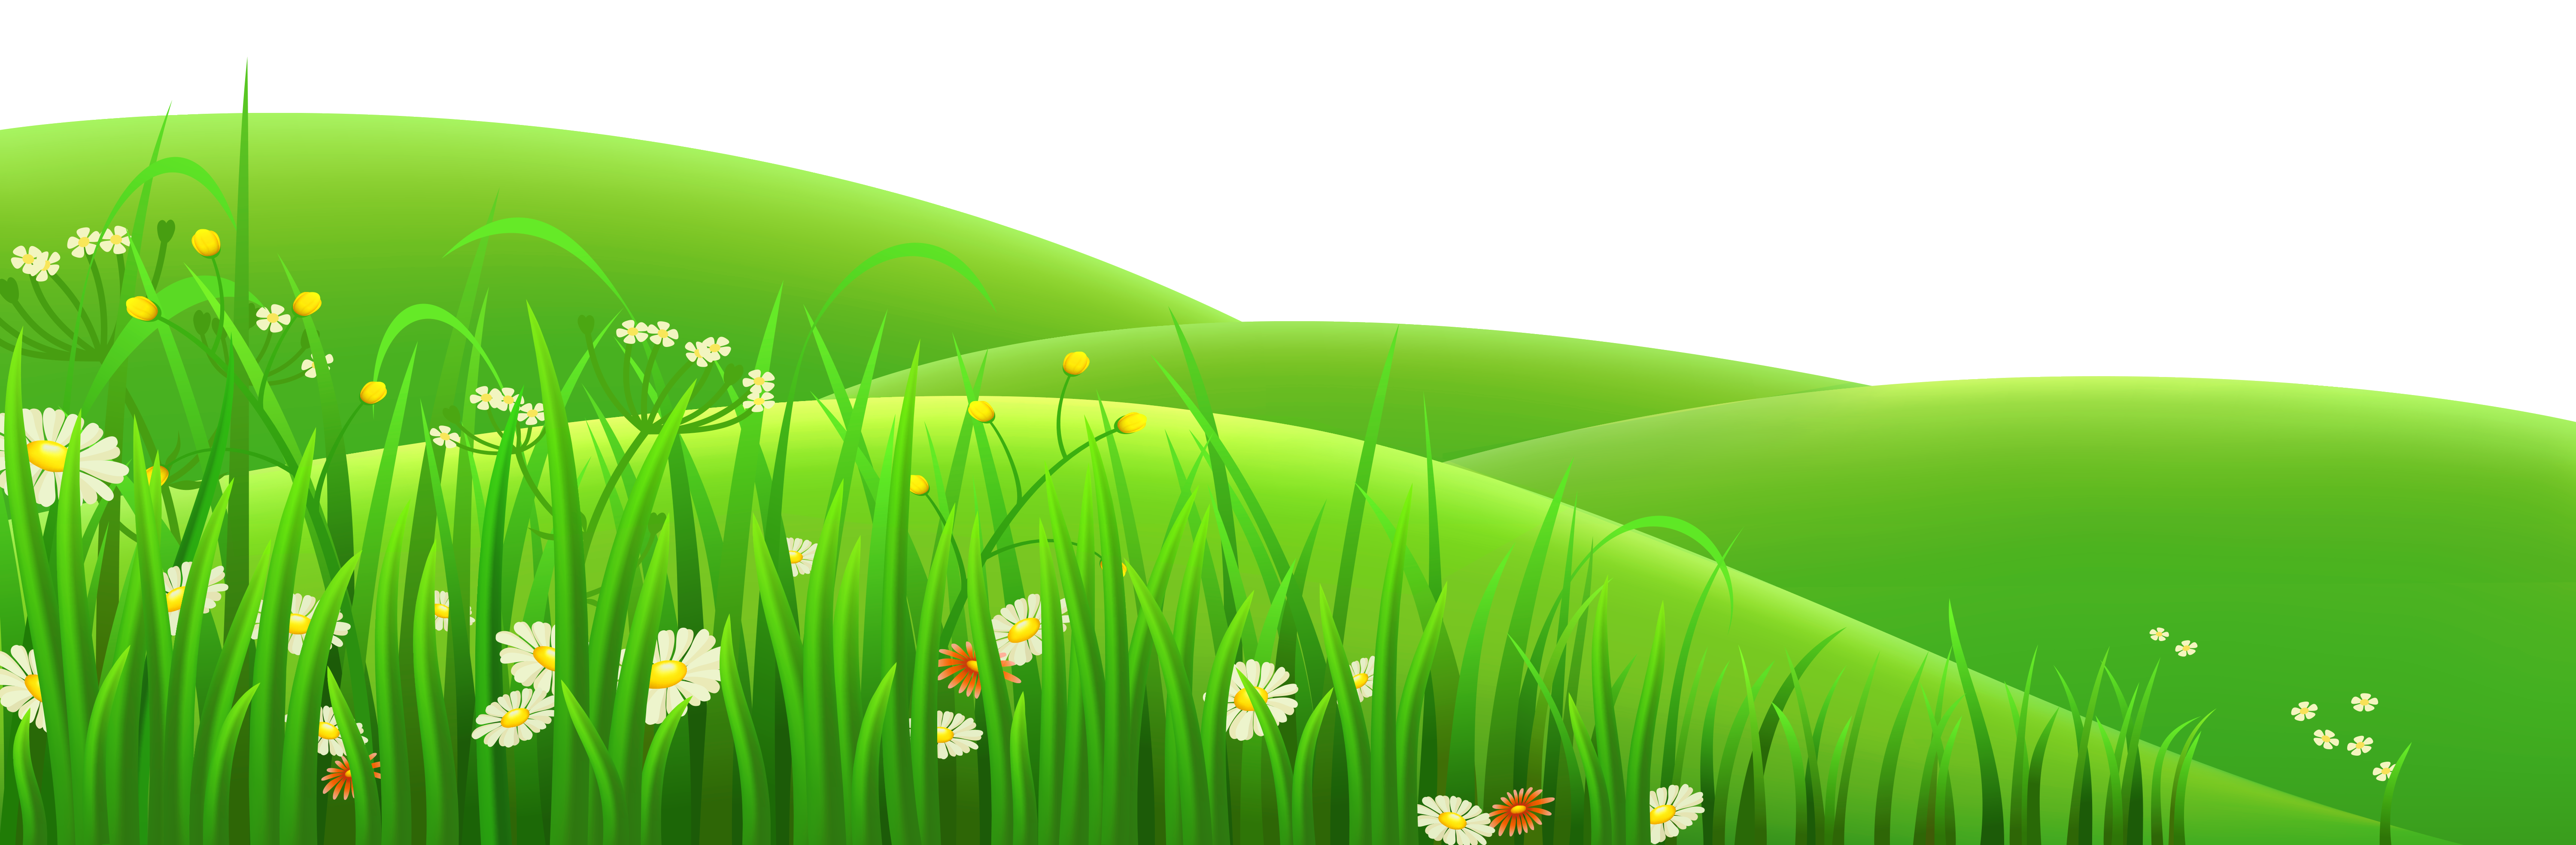 Summer Meadow Picture Free HQ Image PNG Image